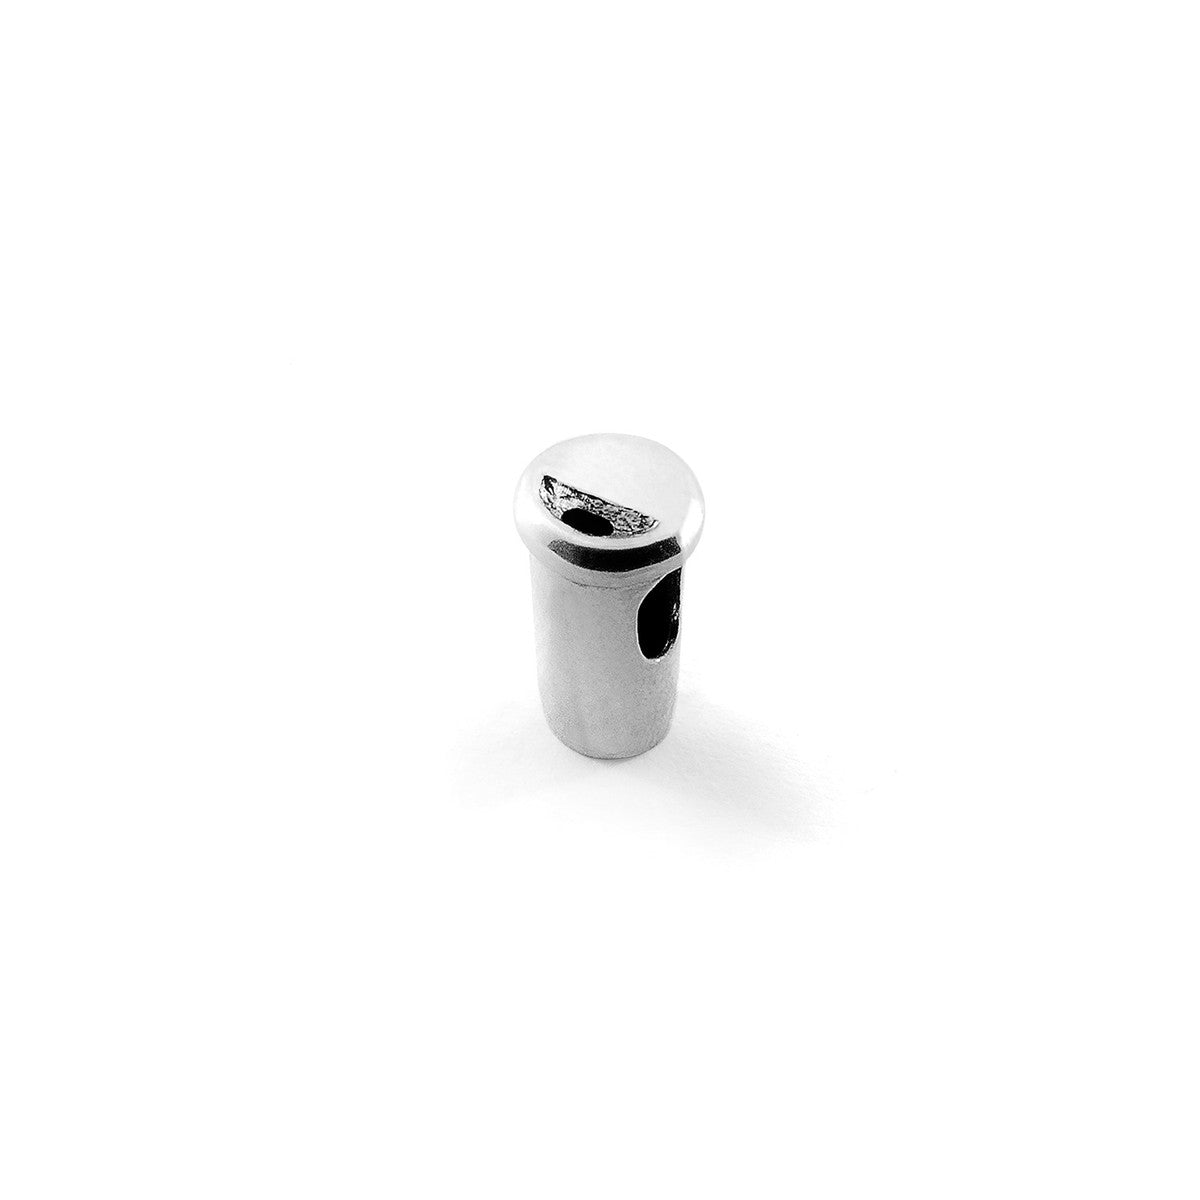 GUSTATORY Coffee Takeout Cup Silver Bead